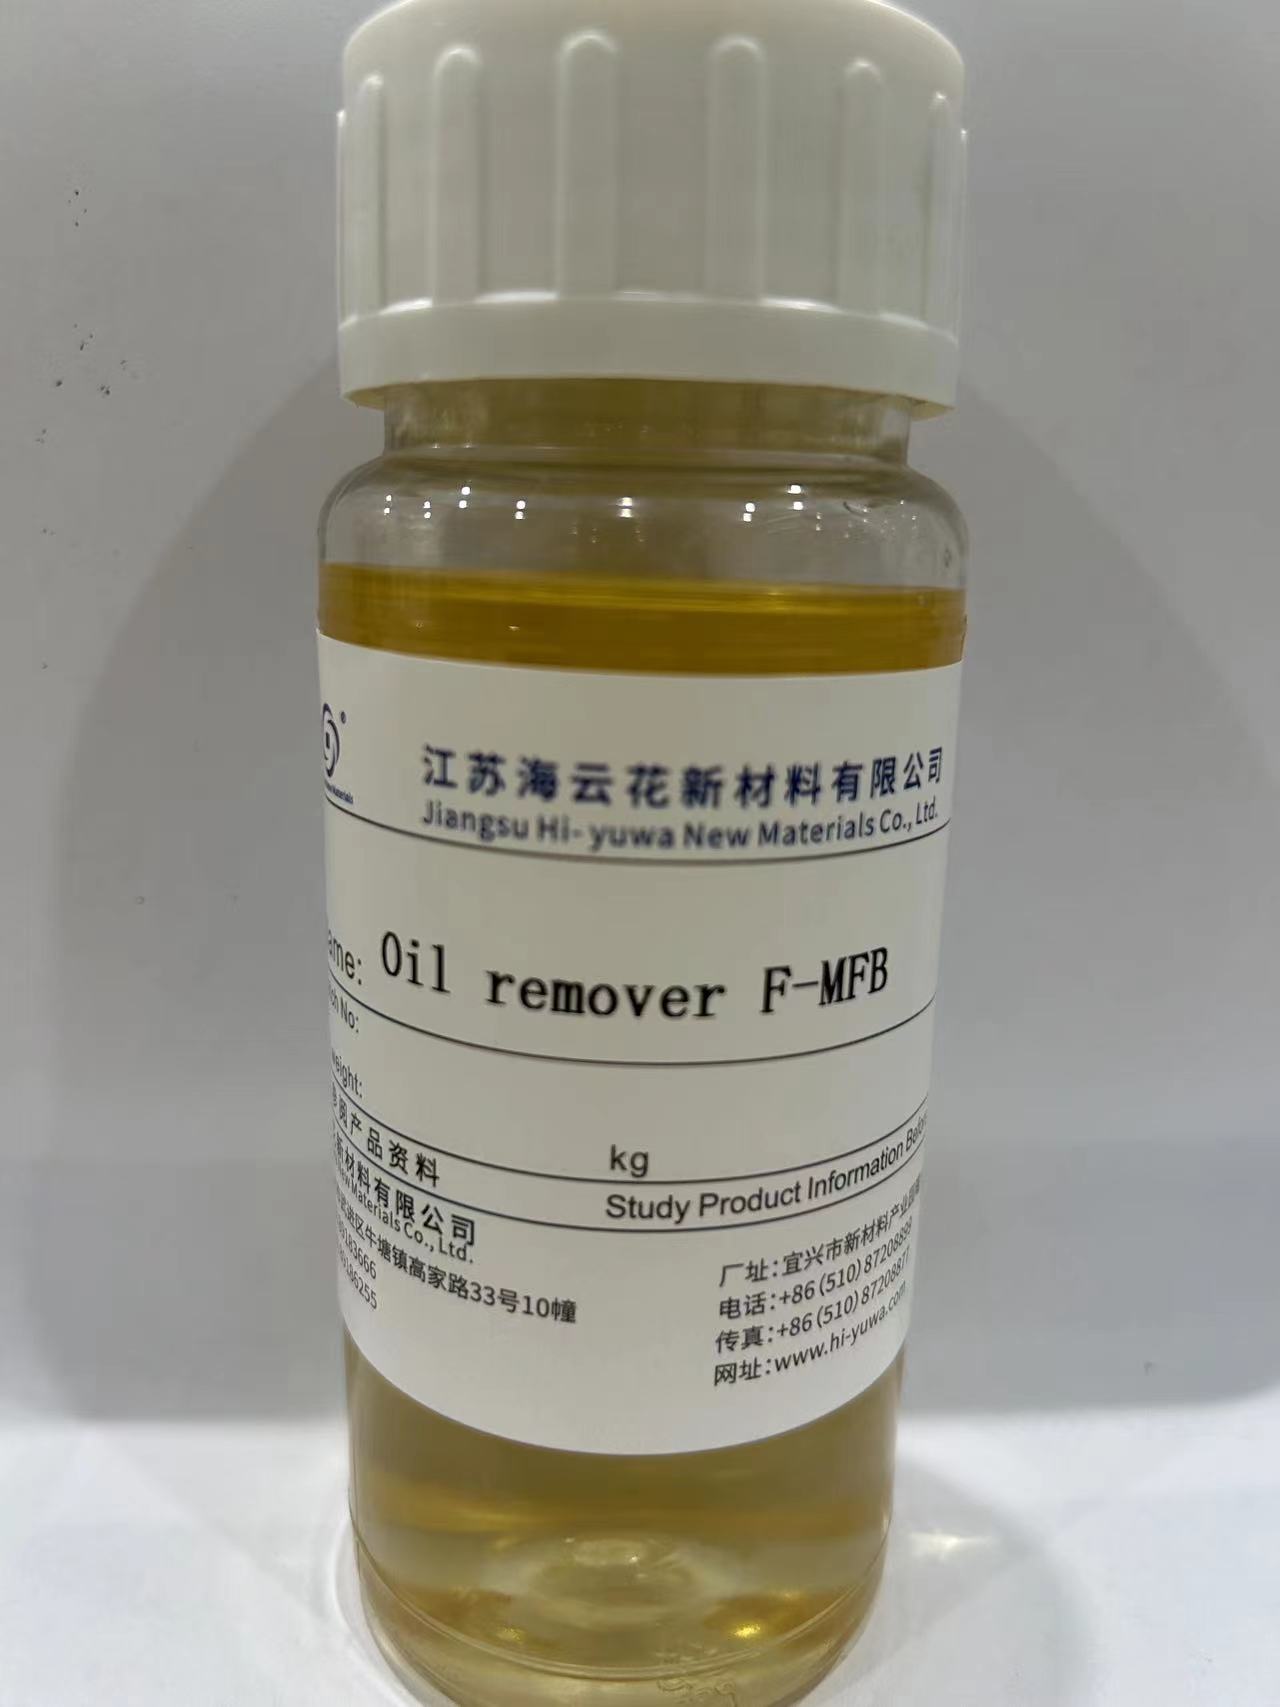 Stain remover F-MFB